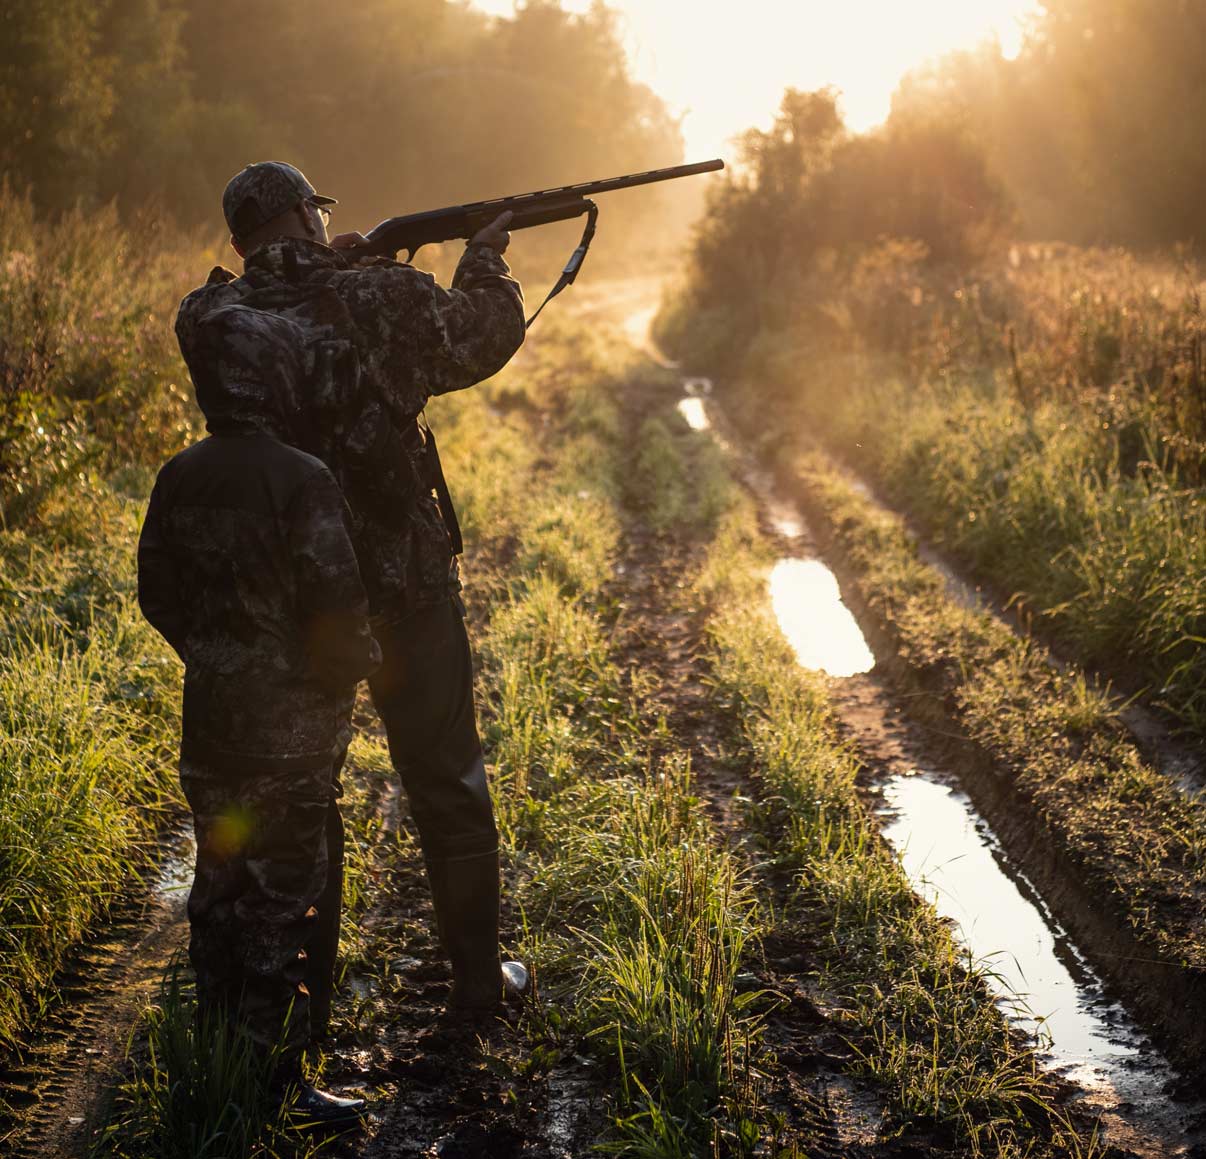 Elevate your turkey hunting with the Deer's Eye View App